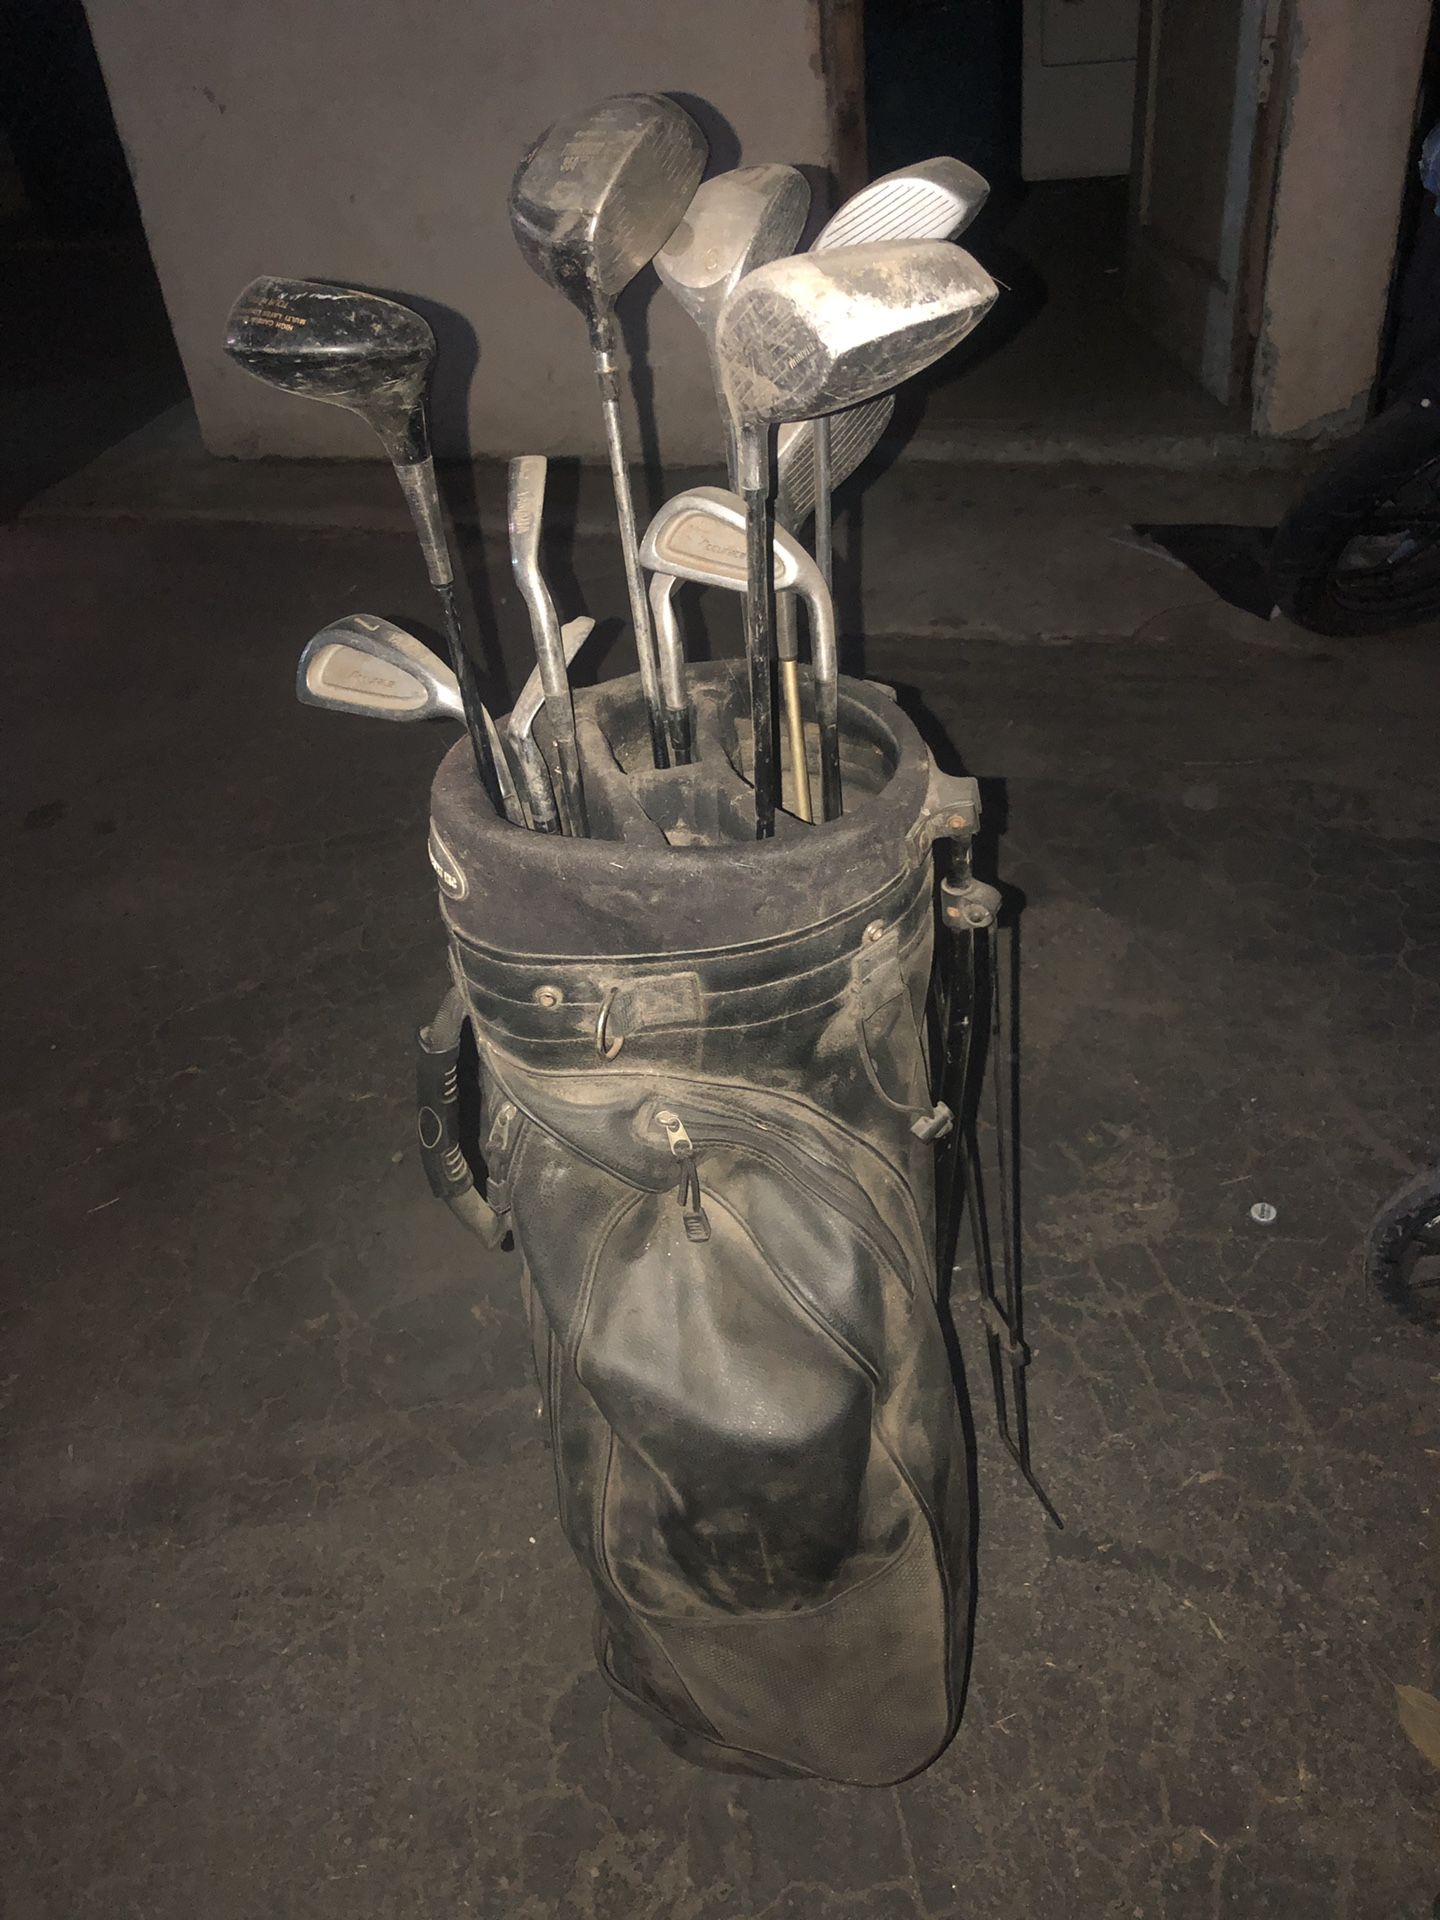 Used golf bag and clubs.